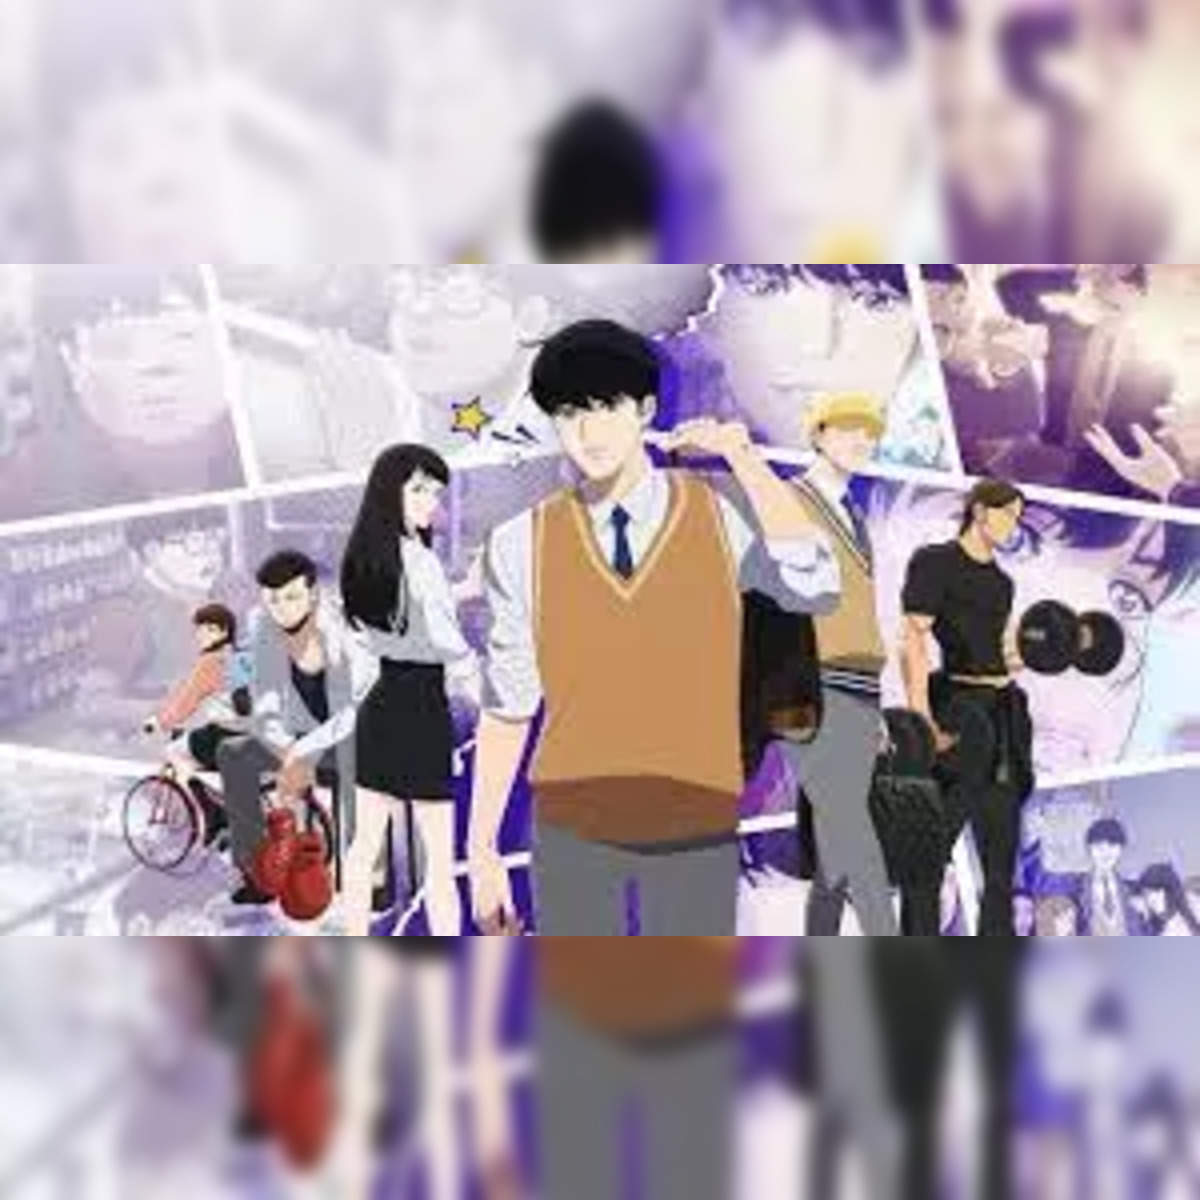 Solo Leveling Anime: Crunchyroll to Premiere Manhwa Adapt on Jan 6th